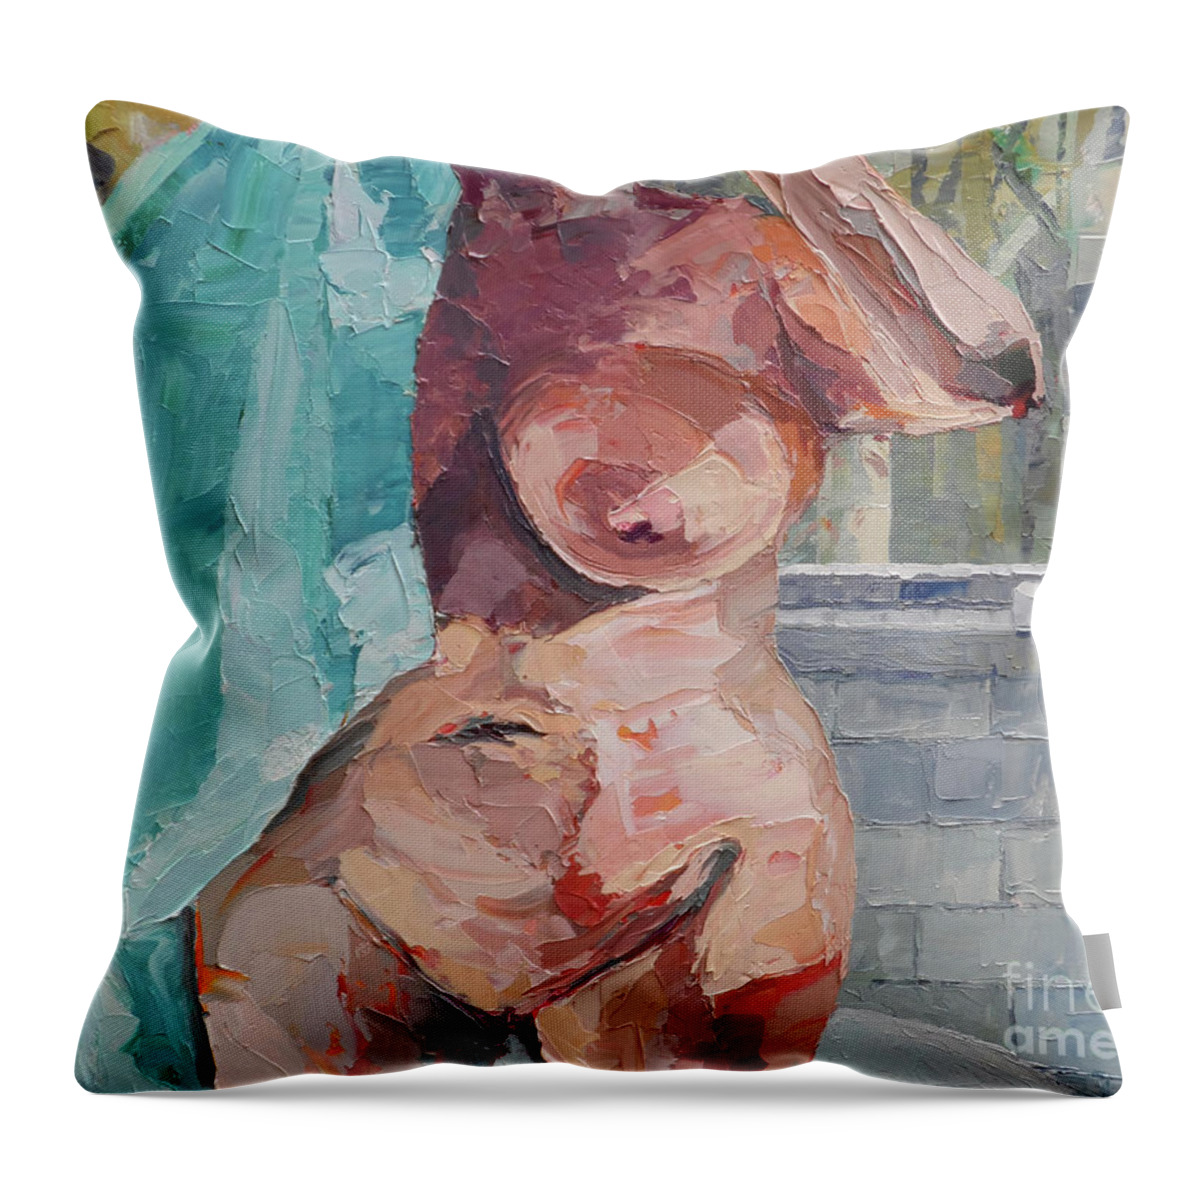 Nude Throw Pillow featuring the painting Master Bath by PJ Kirk